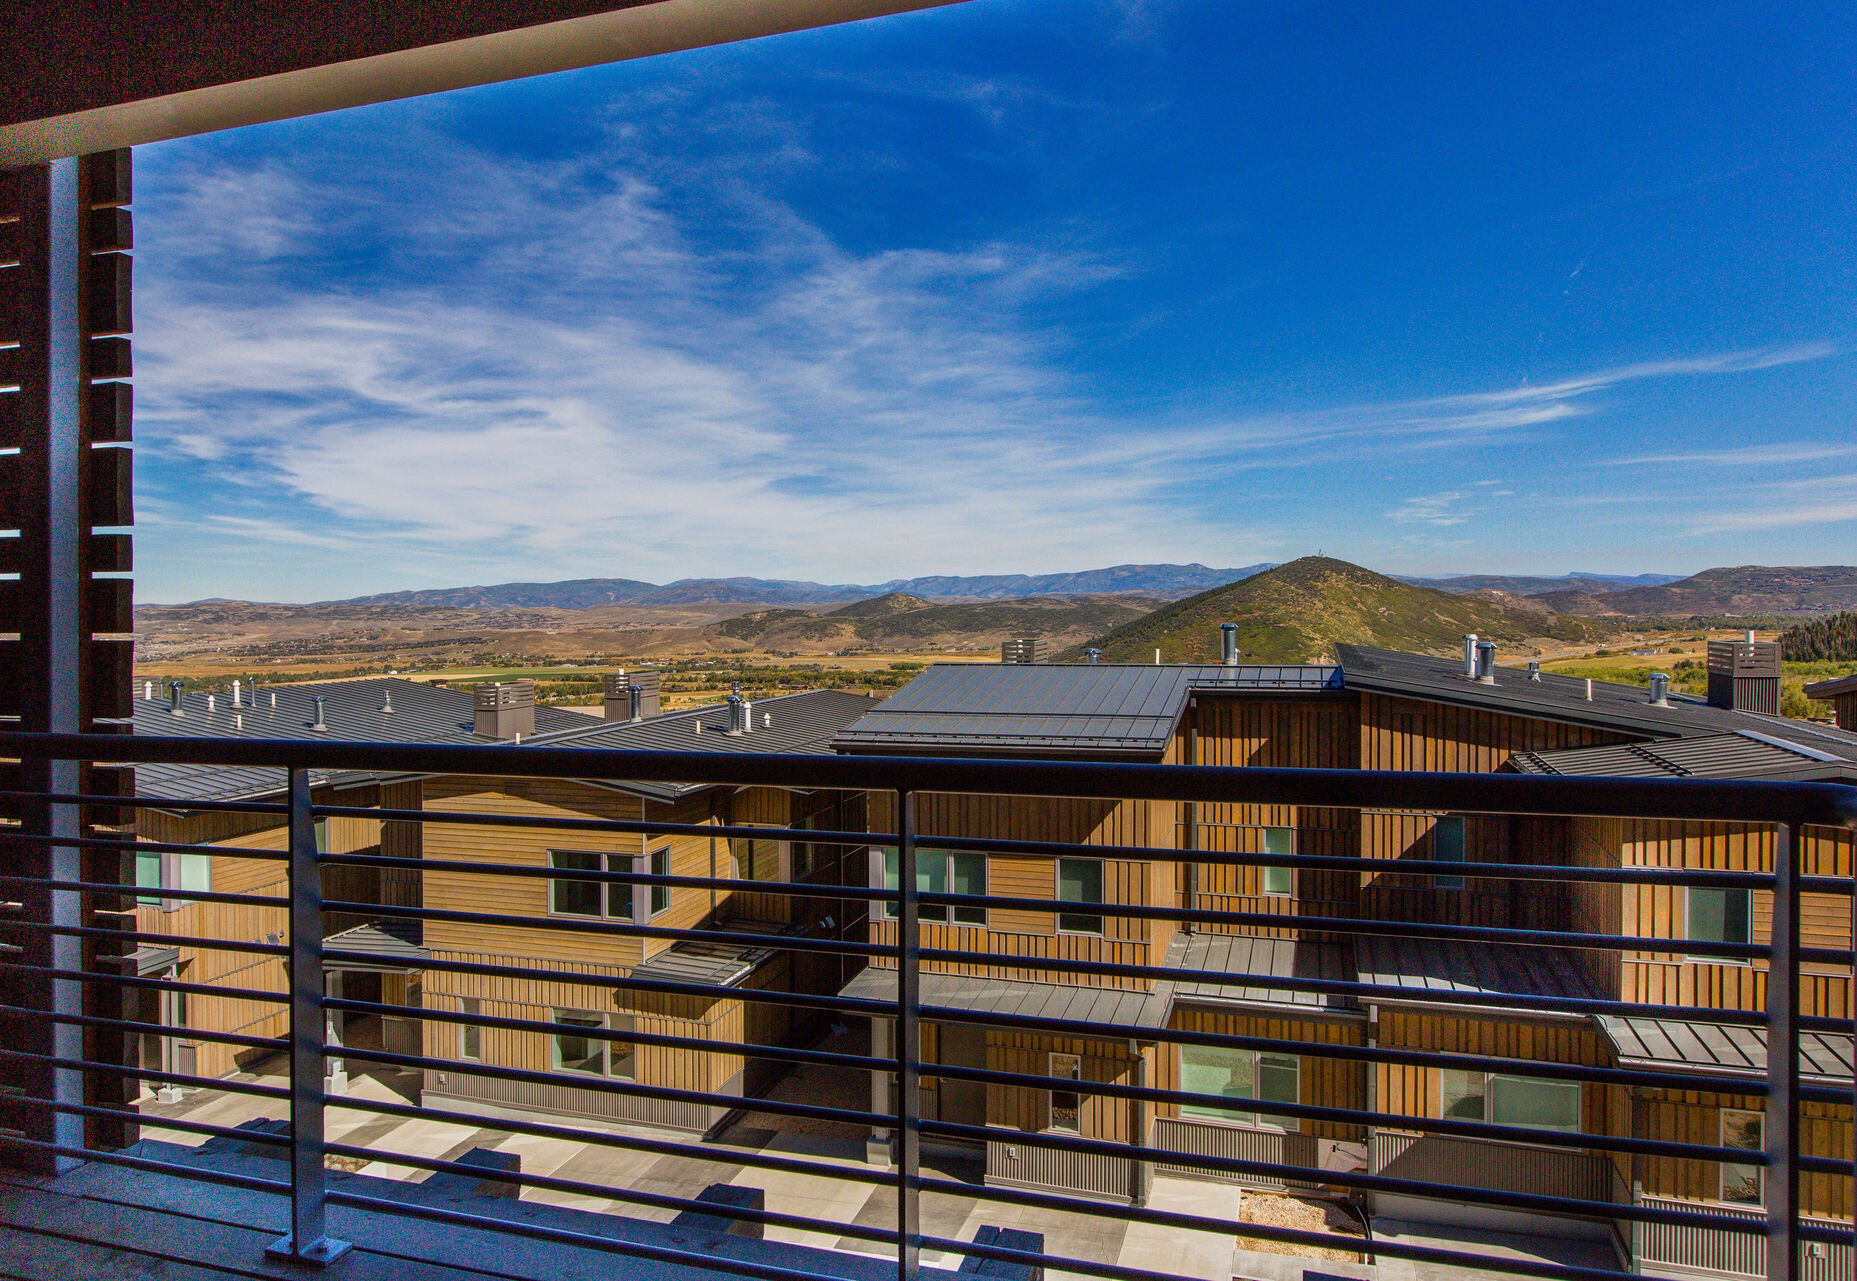 Take in the Gorgeous Views from your Private Master Deck